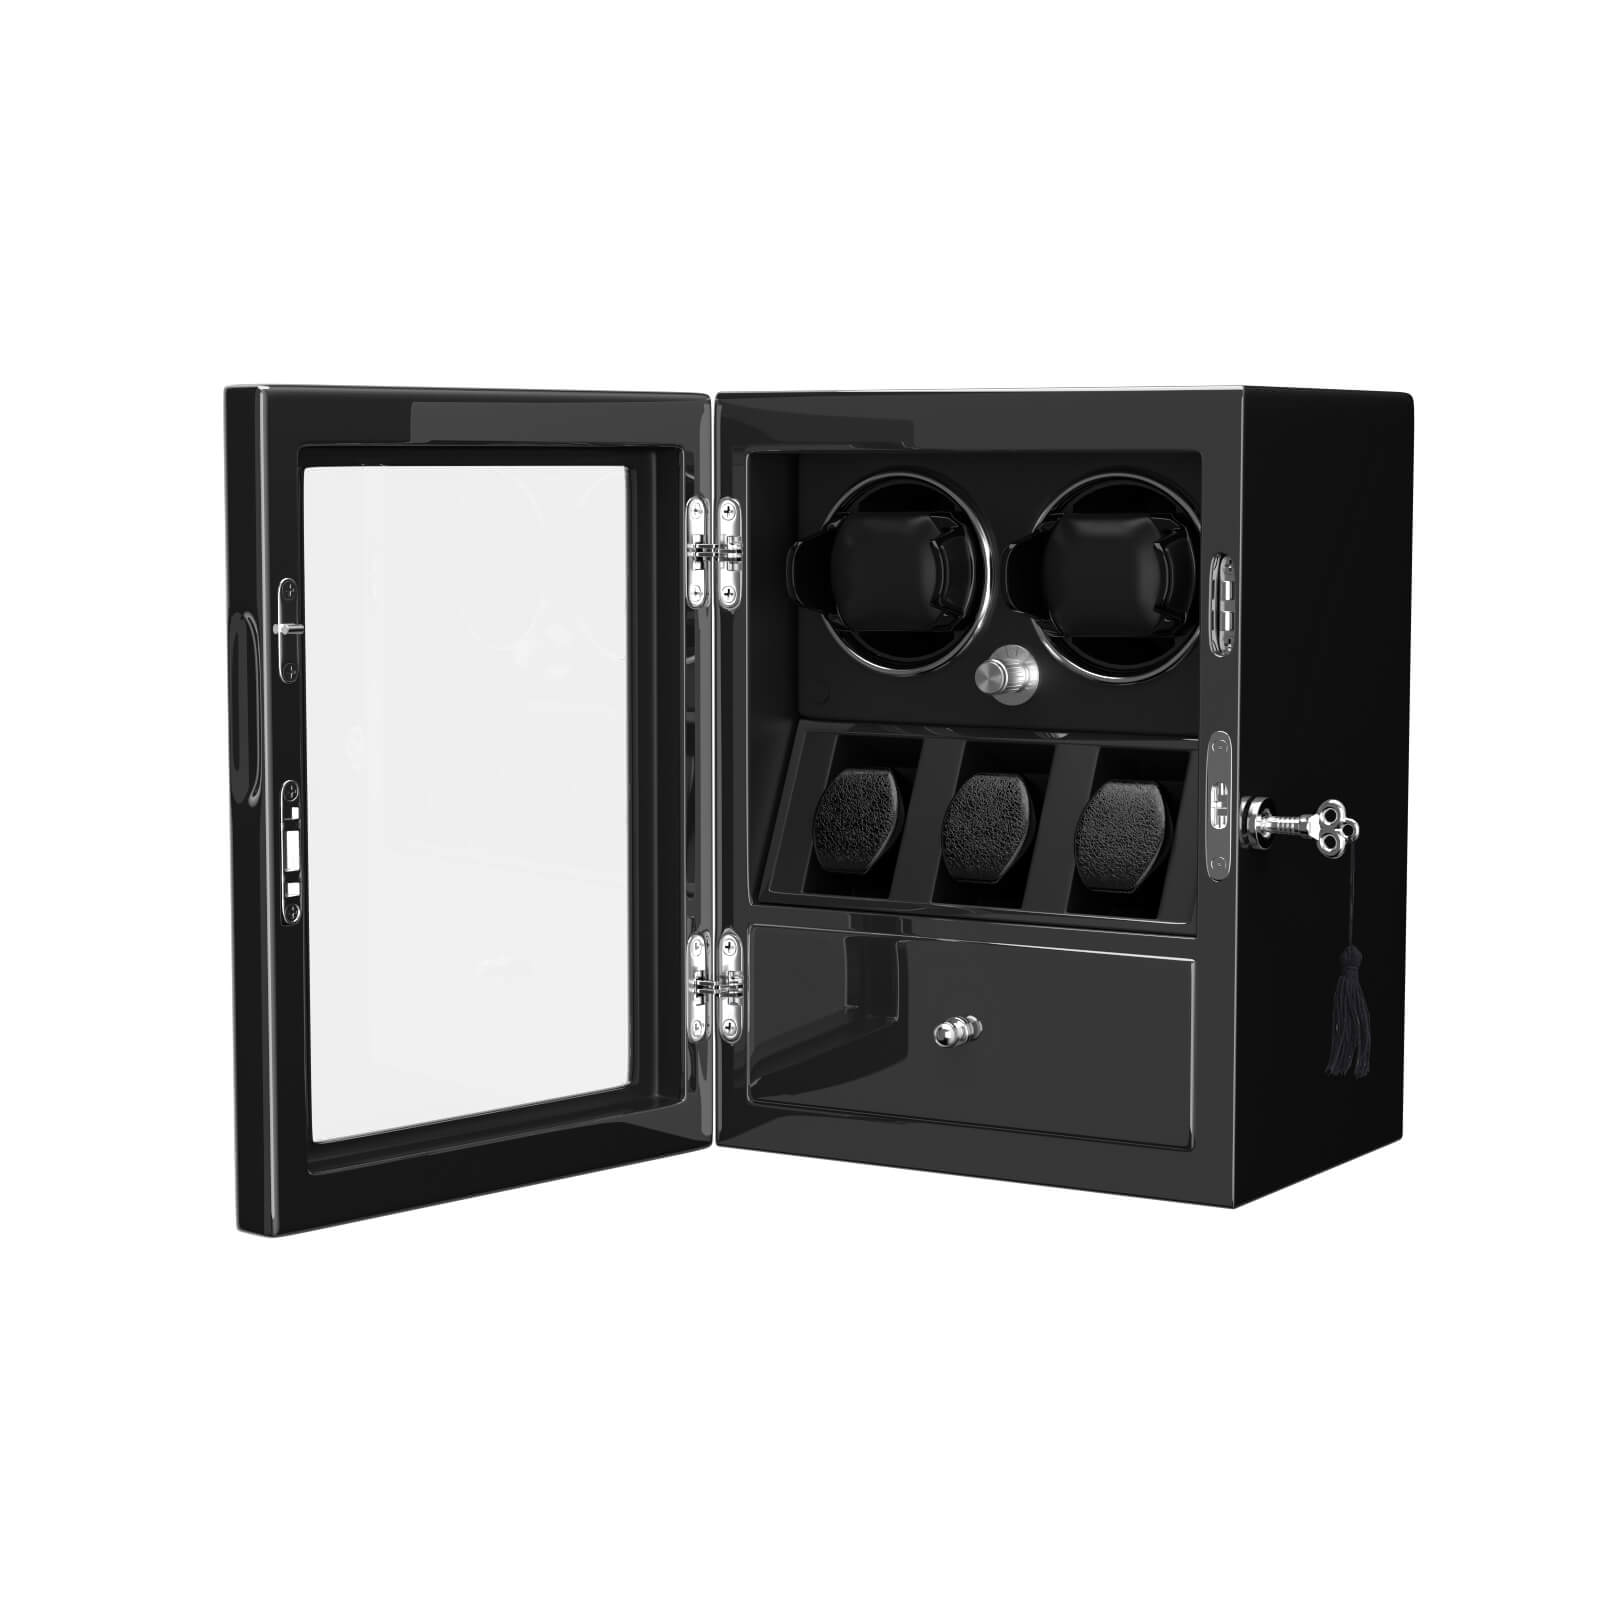 Compact 2 Watch Winders with 3 Watches Organizer Storage- Black